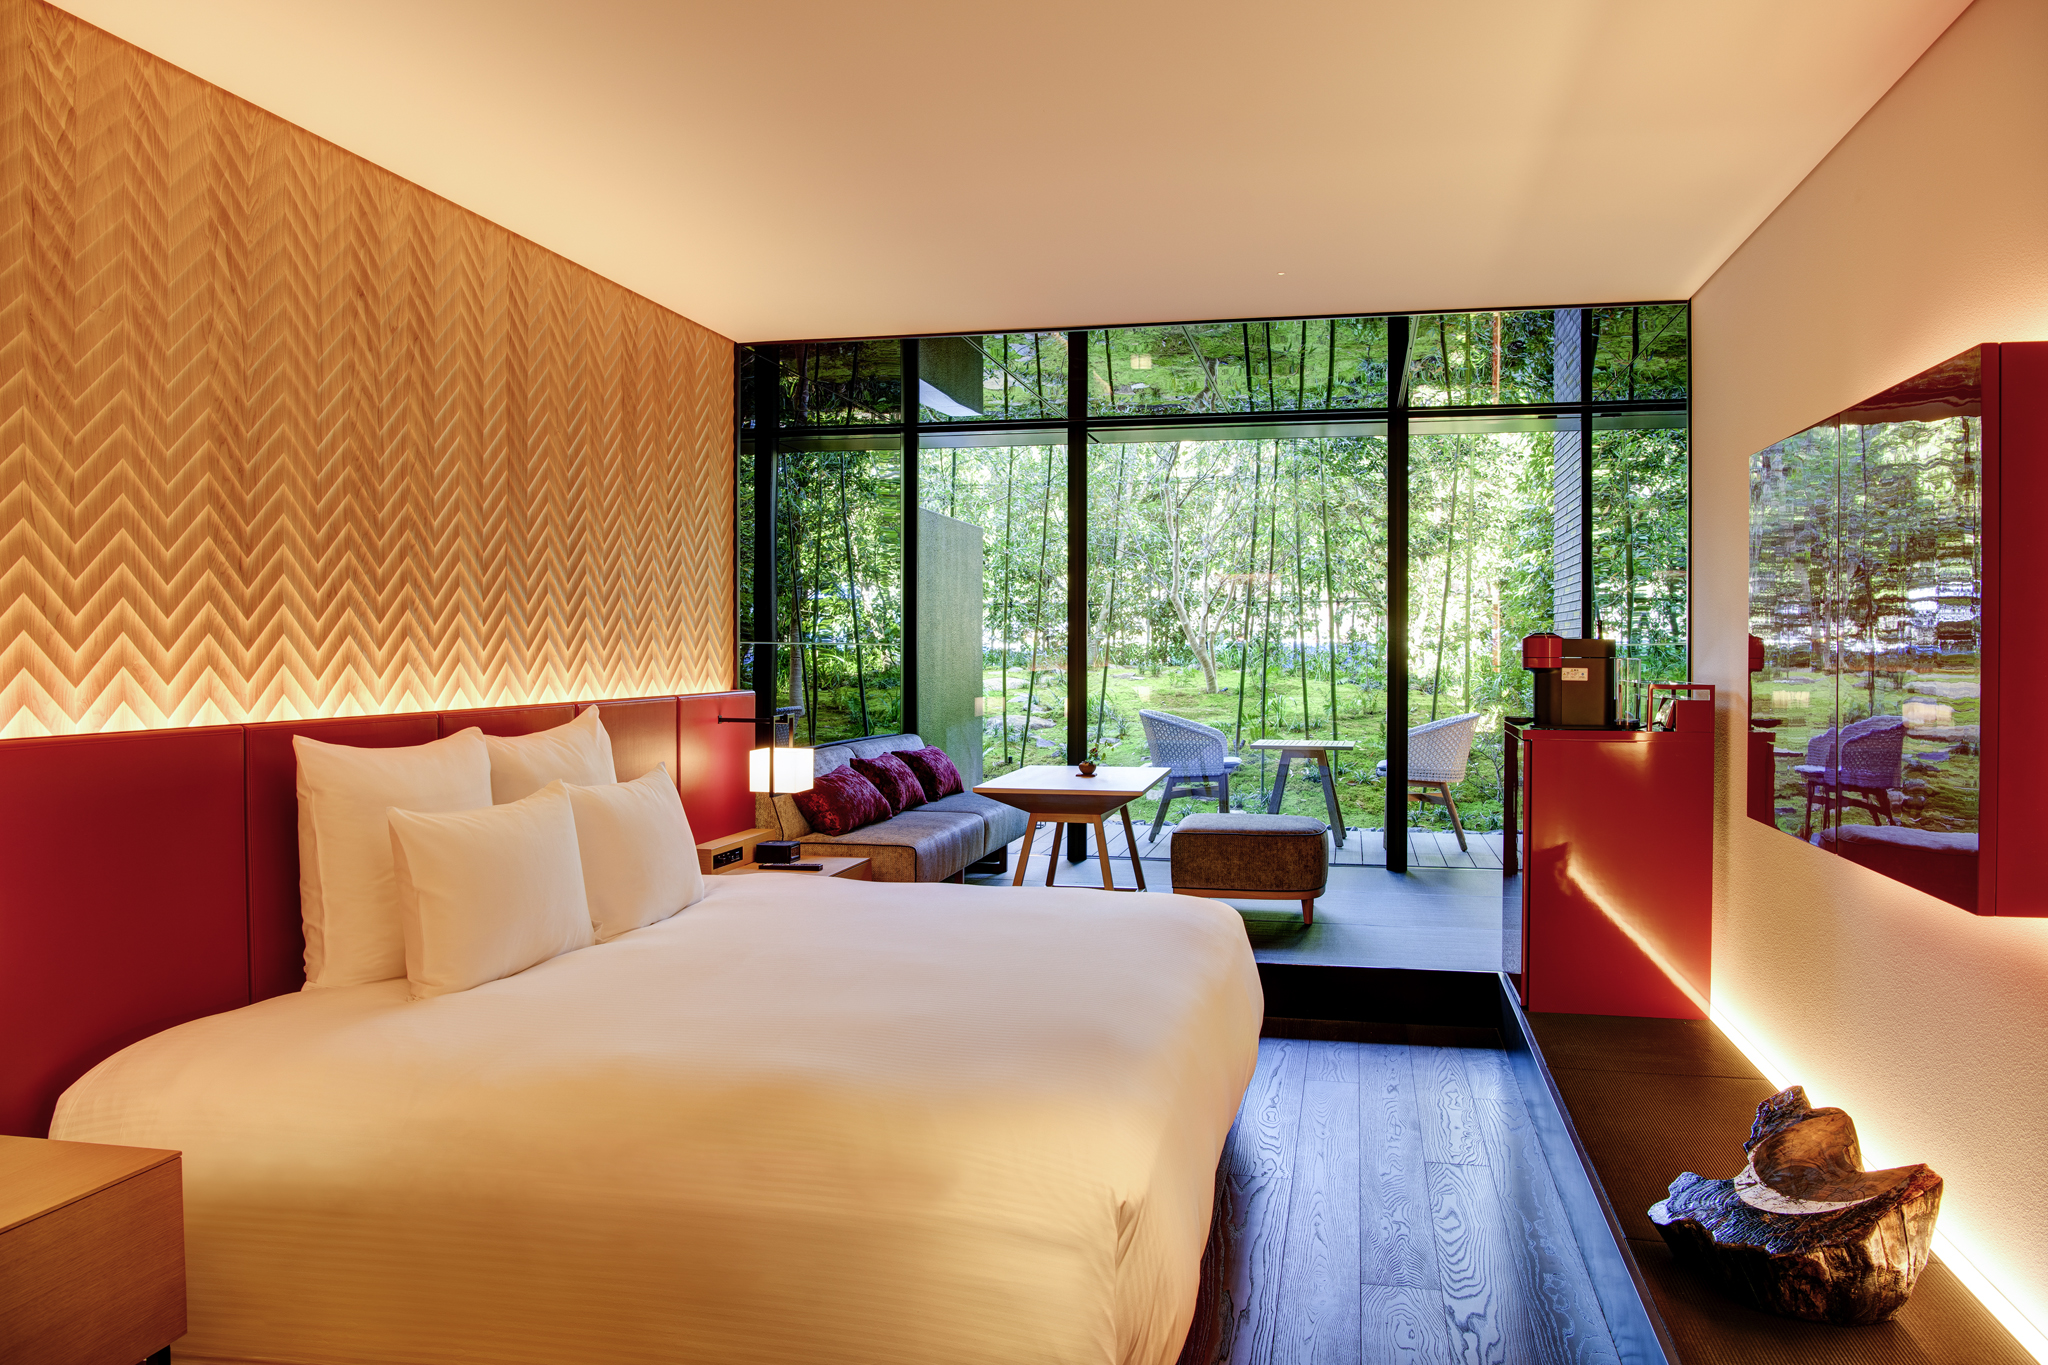 Accor has doubled its portfolio of MGallery hotels in Japan, with the opening of the Kyoto Yura Hotel Nijo Jo Bettei MGallery, the second in the country. The luxury boutique hotel was designed by Yukio Hashimoto and is centred around a Japanese garden. Click to enlarge.